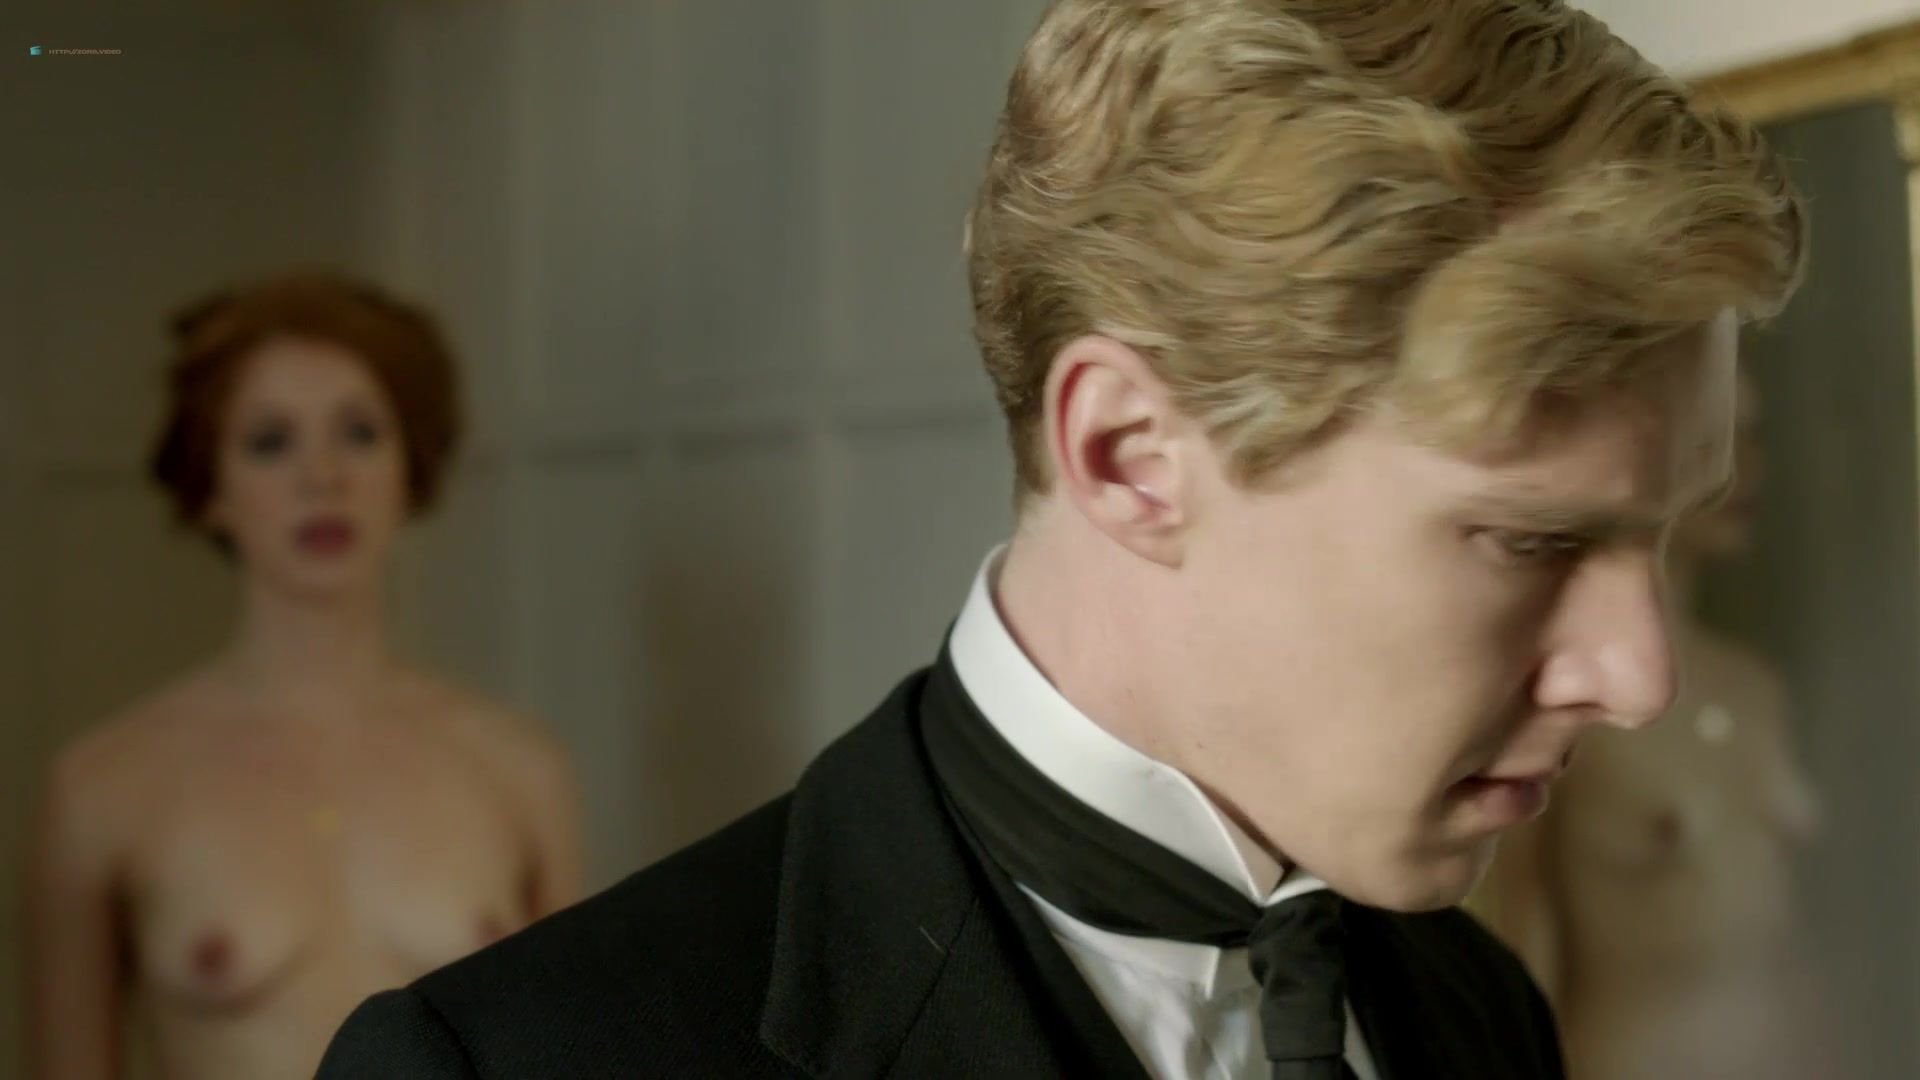 Sexcam Rebecca Hall, Adelaide Clemens naked - Parades End (2012) Hot Blow Jobs